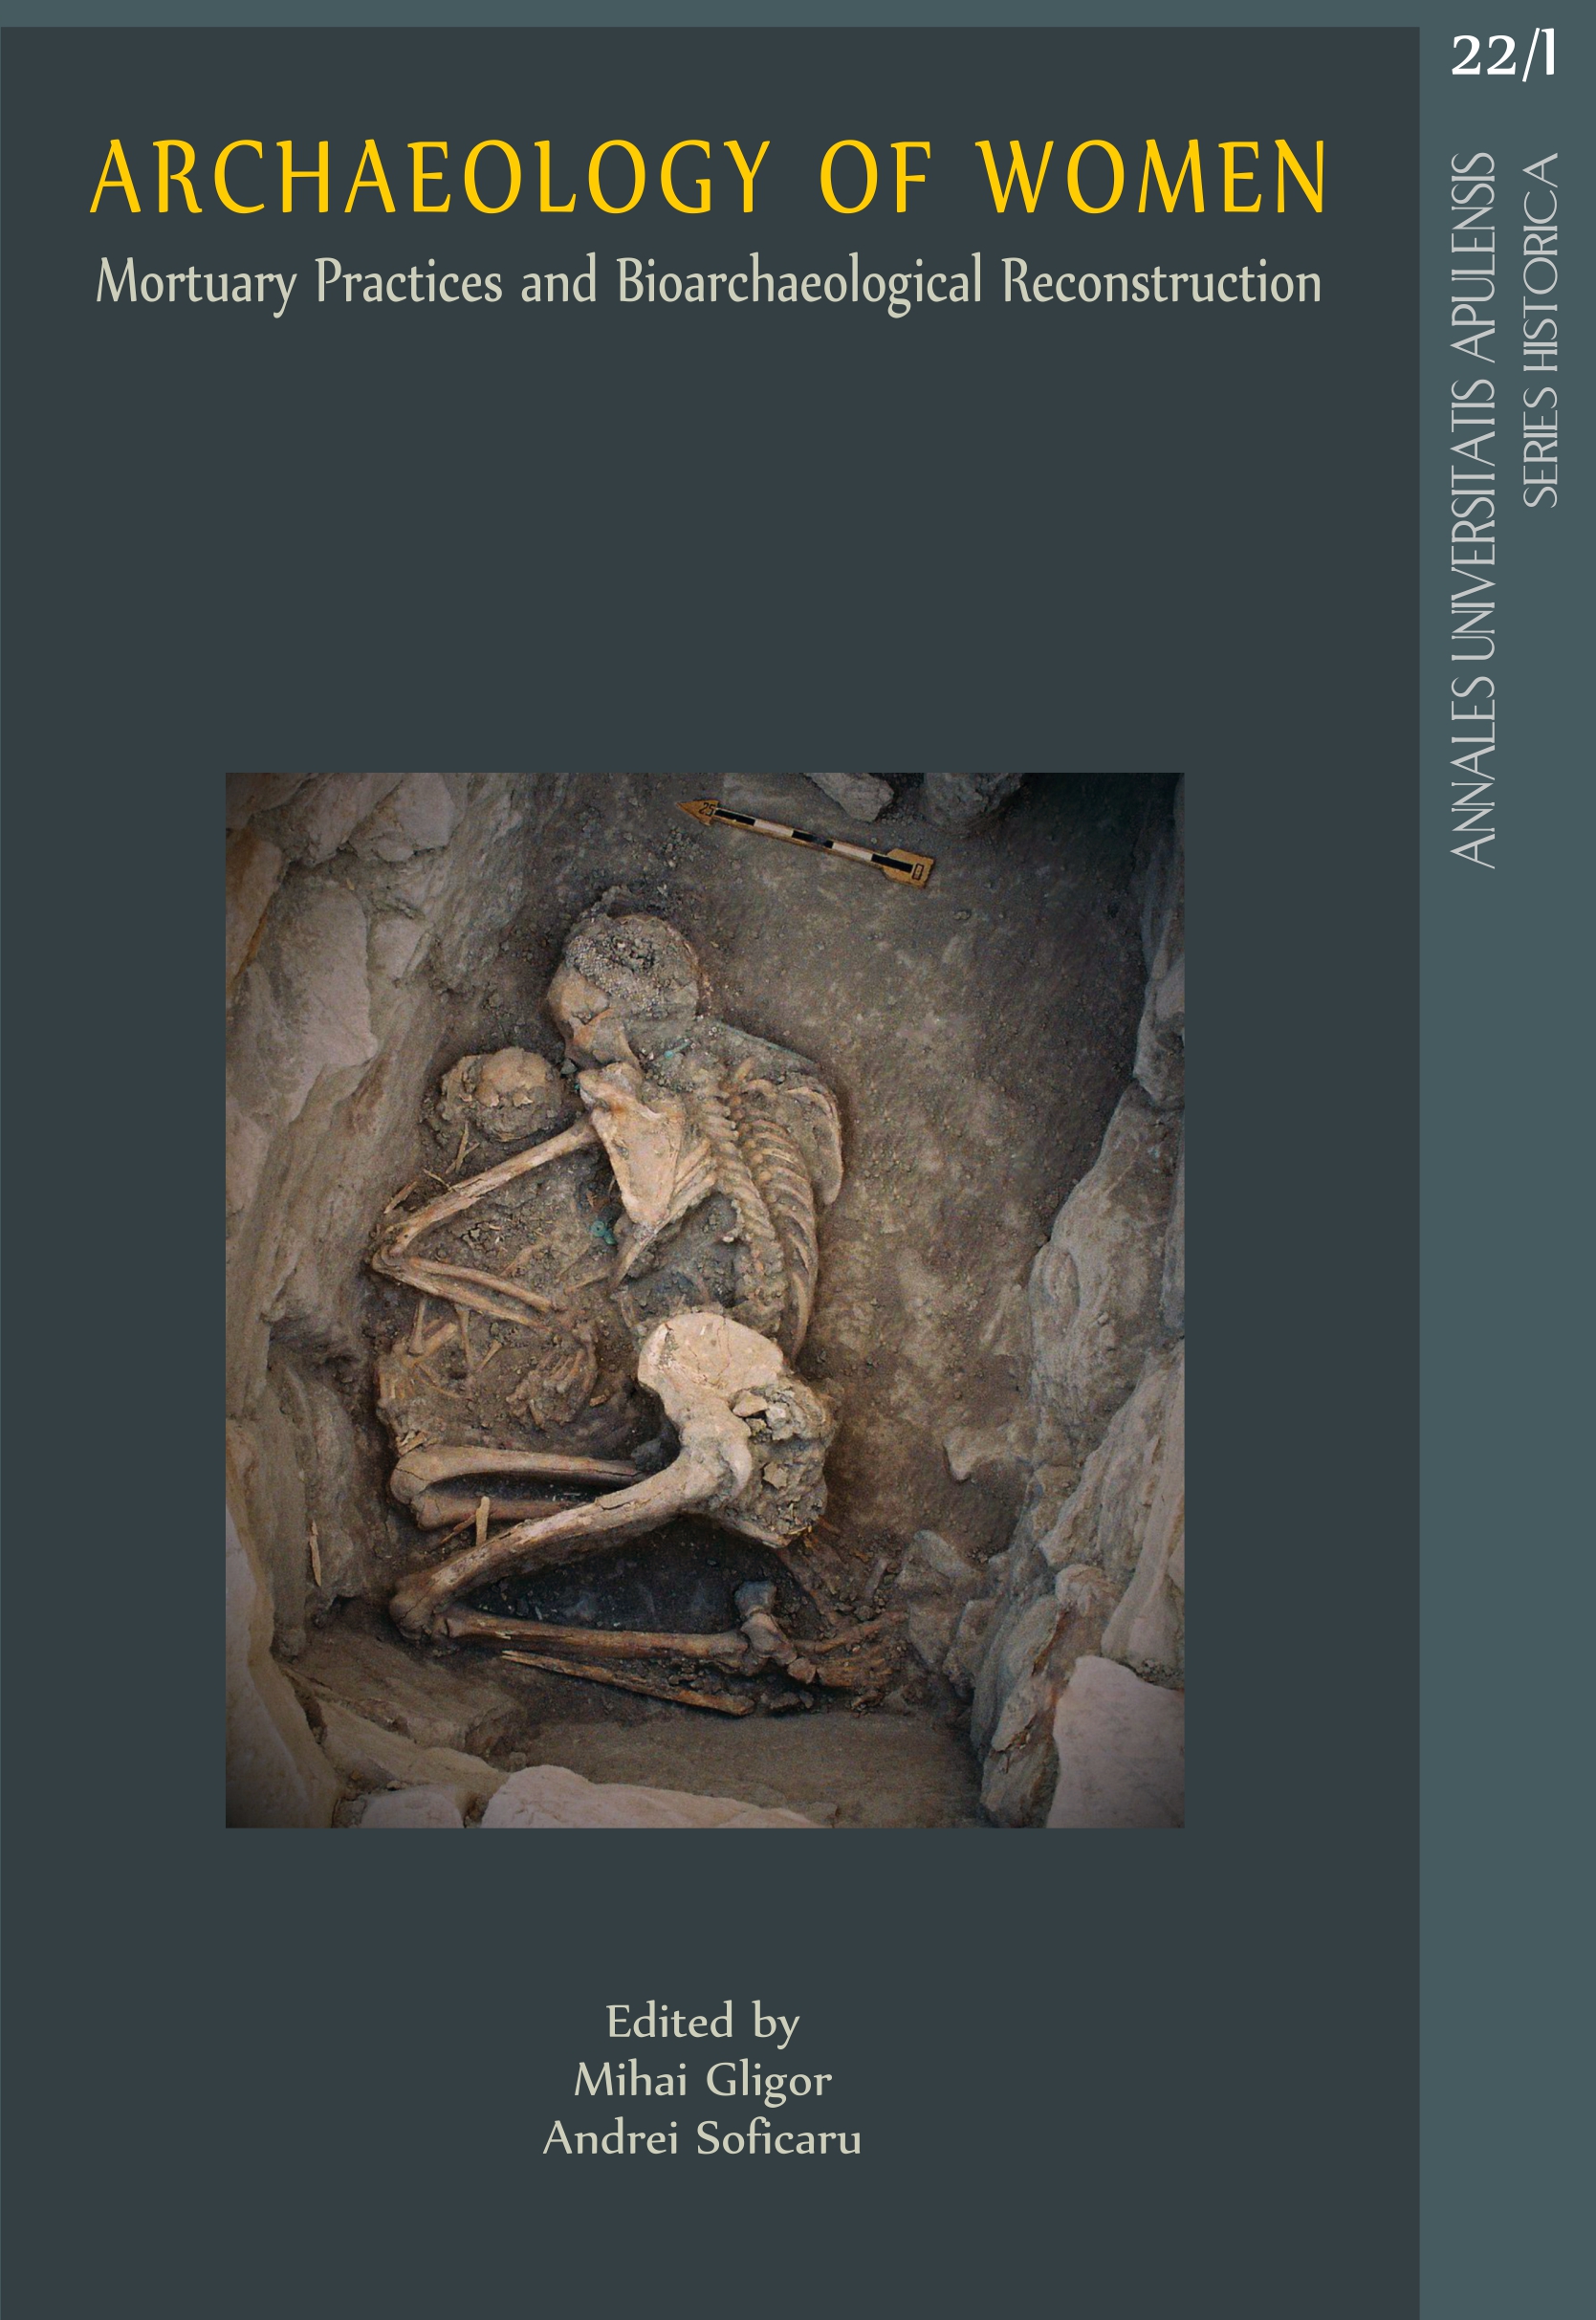 Cranial Fractures in 2005 Early Eneolithic Multiple Burial from Alba Iulia-Lumea Nouă (Romania)